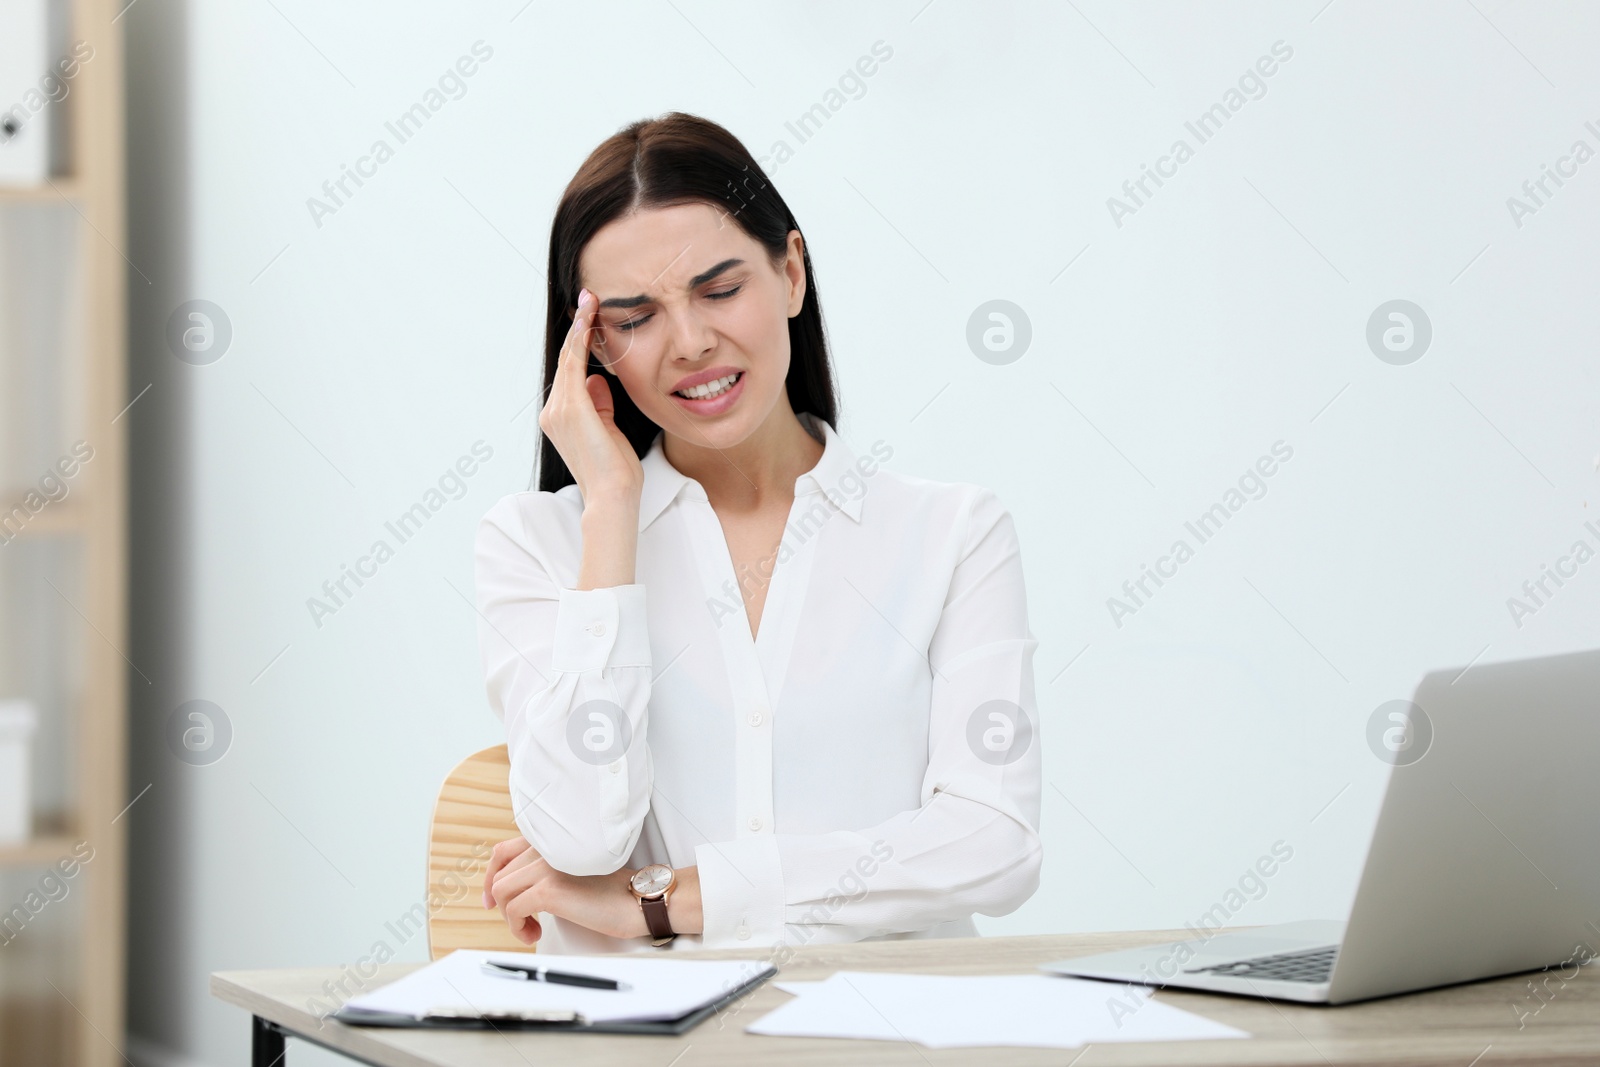 Photo of Woman suffering from migraine at workplace in office